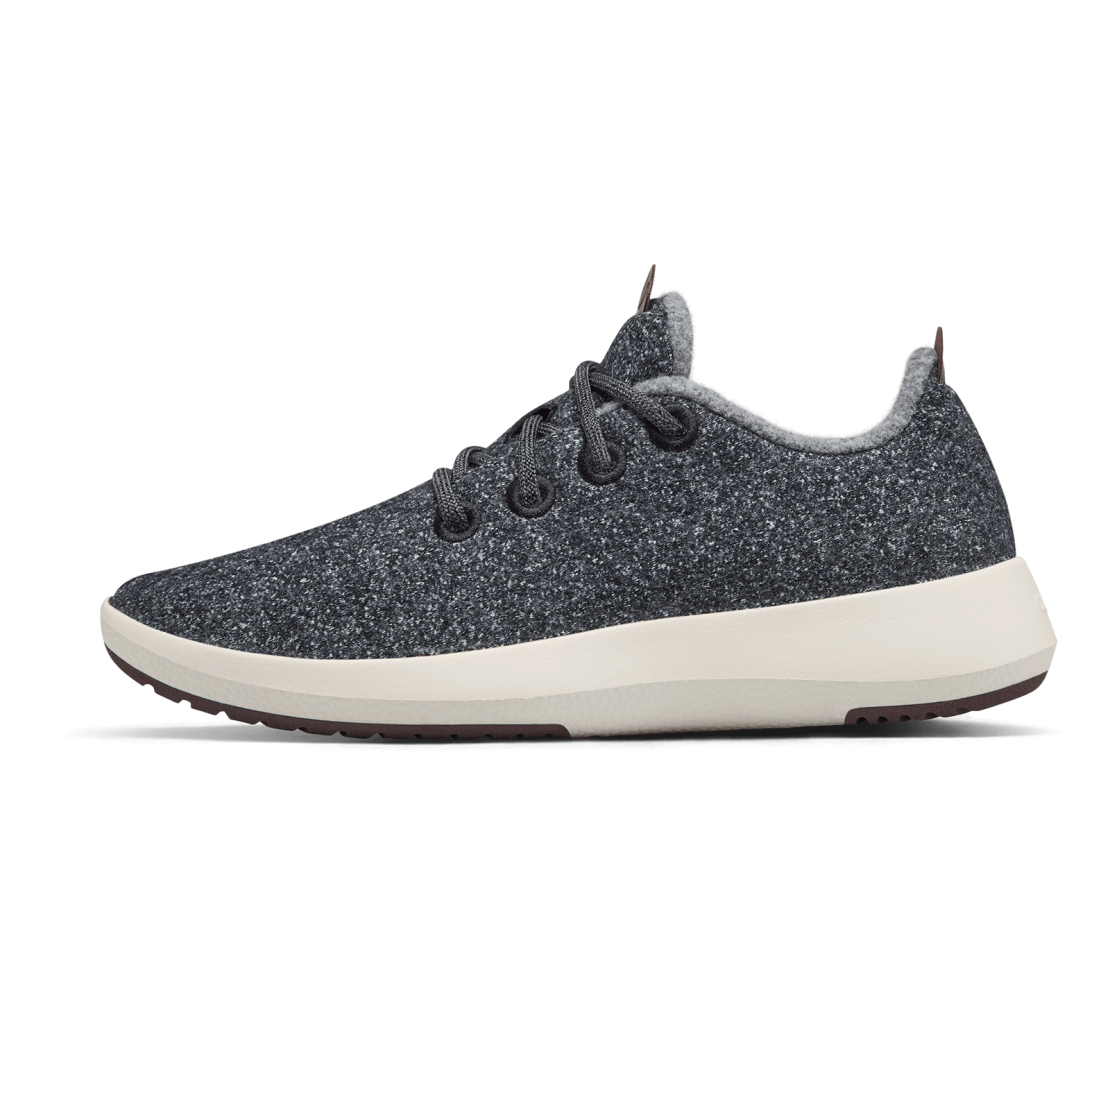 The Allbirds Wool Runners Are on Sale for Up to 42% Off